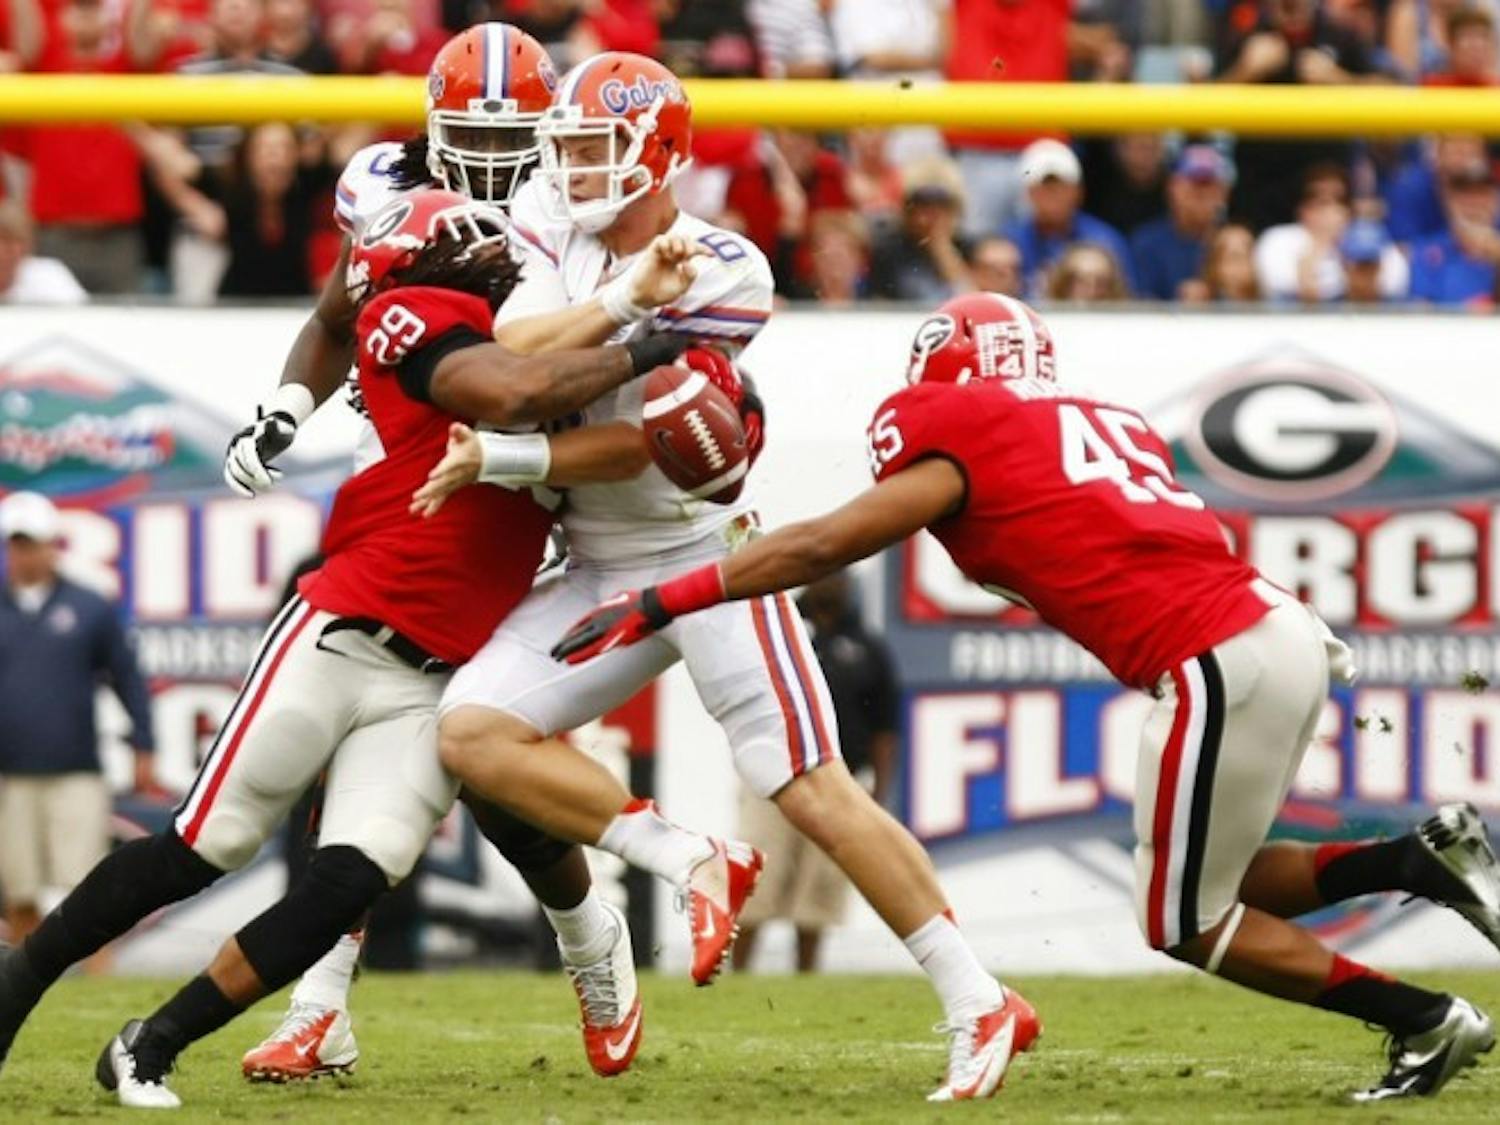 Sophomore quarterback Jeff Driskel (6) loses possession of the ball while being sacked by Georgia linebacker Jarvis Jones (29) during Florida’s 17-9 loss on Saturday at EverBank Field in Jacksonville.
